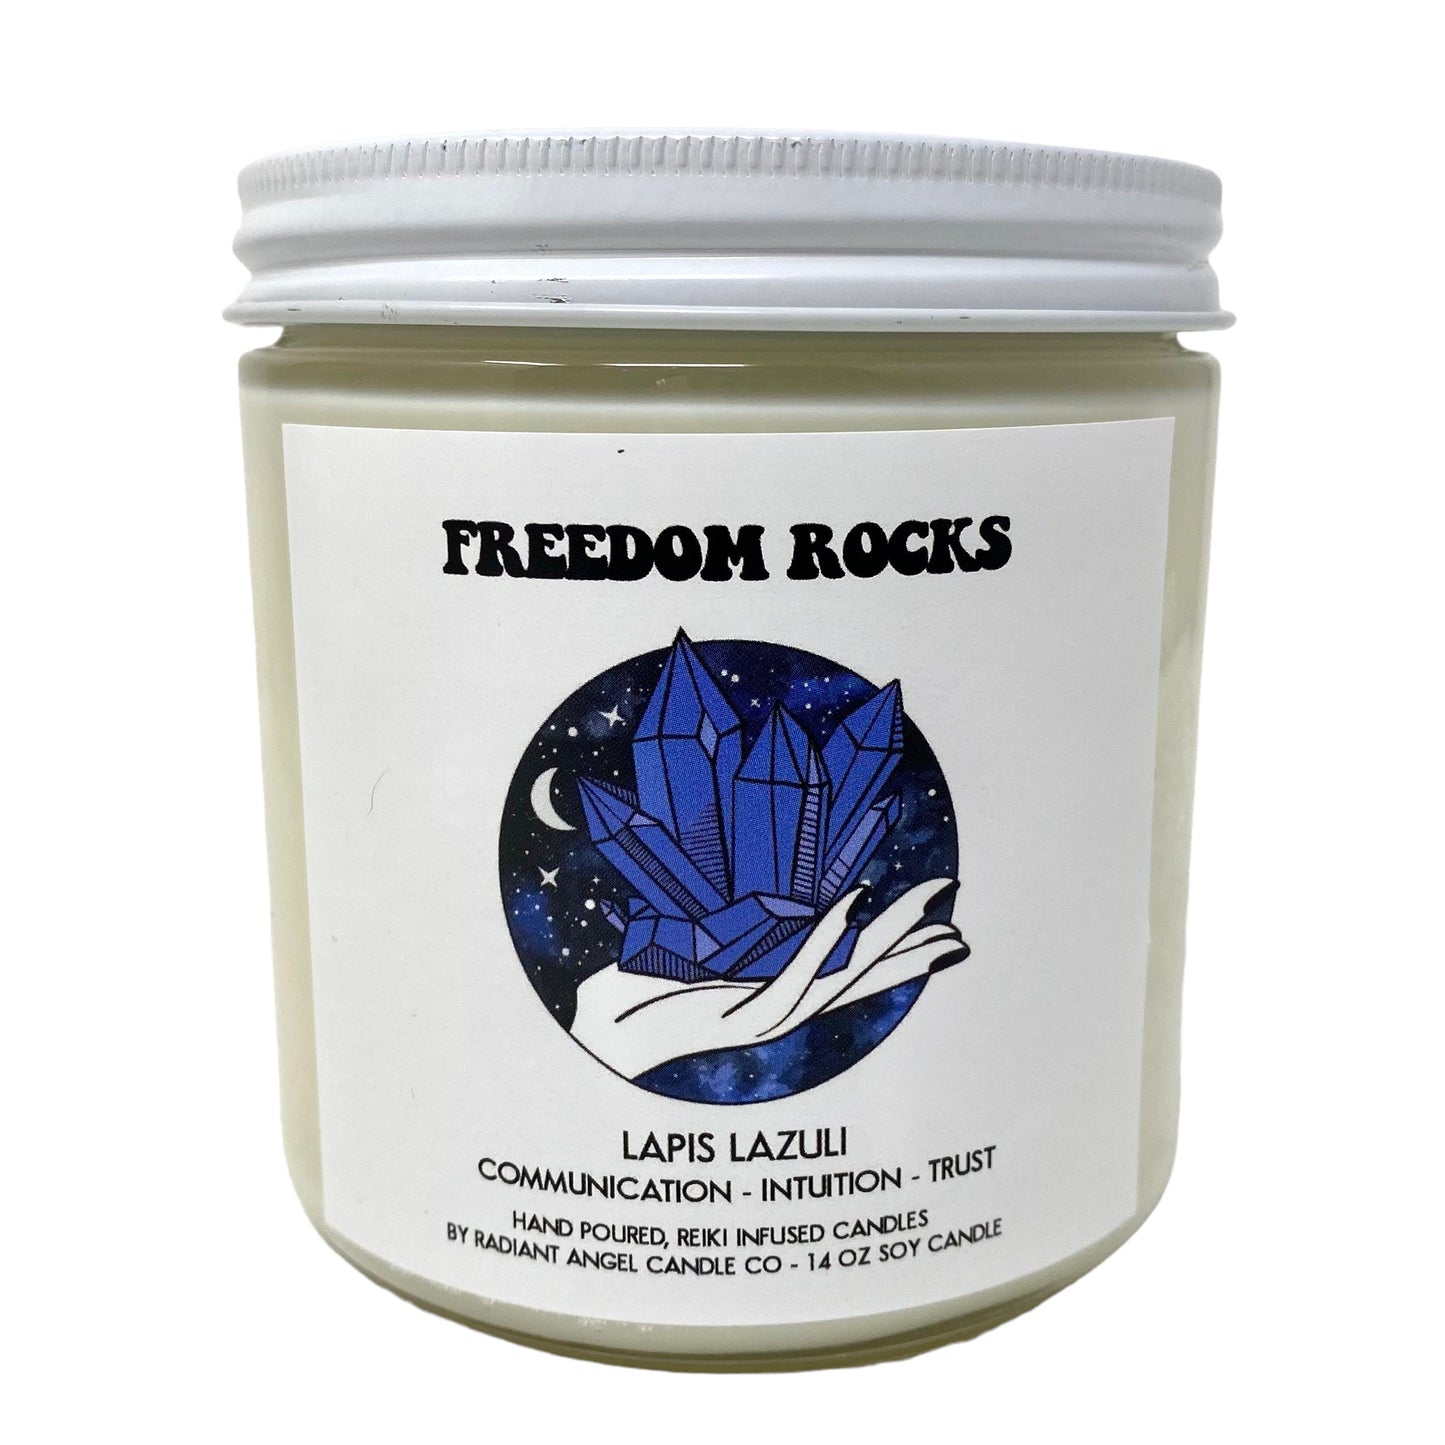 Freedom Rocks Crystal Candles // Intuitive Intentional candles hand poured in NJ with Love.